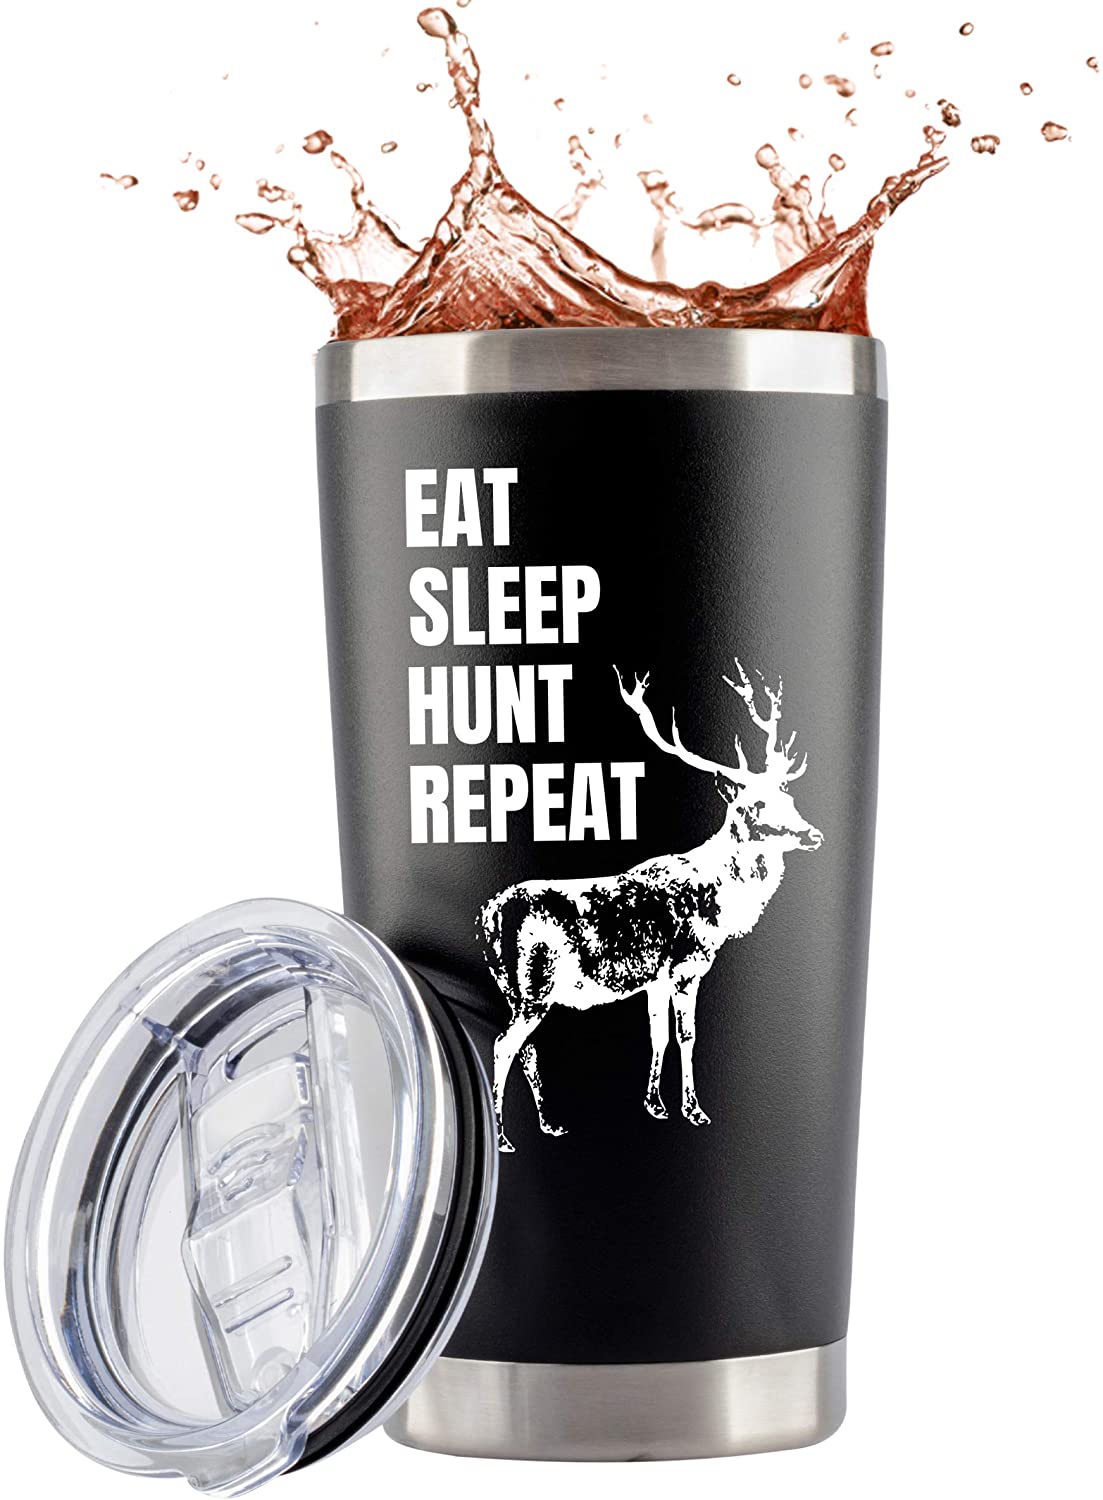 Cold Travel Hunting Tumbler/Mug w Lid Coffee Cup | Hunting Decor Dad | Deer Hunting Hunters Gifts for Men or Women 